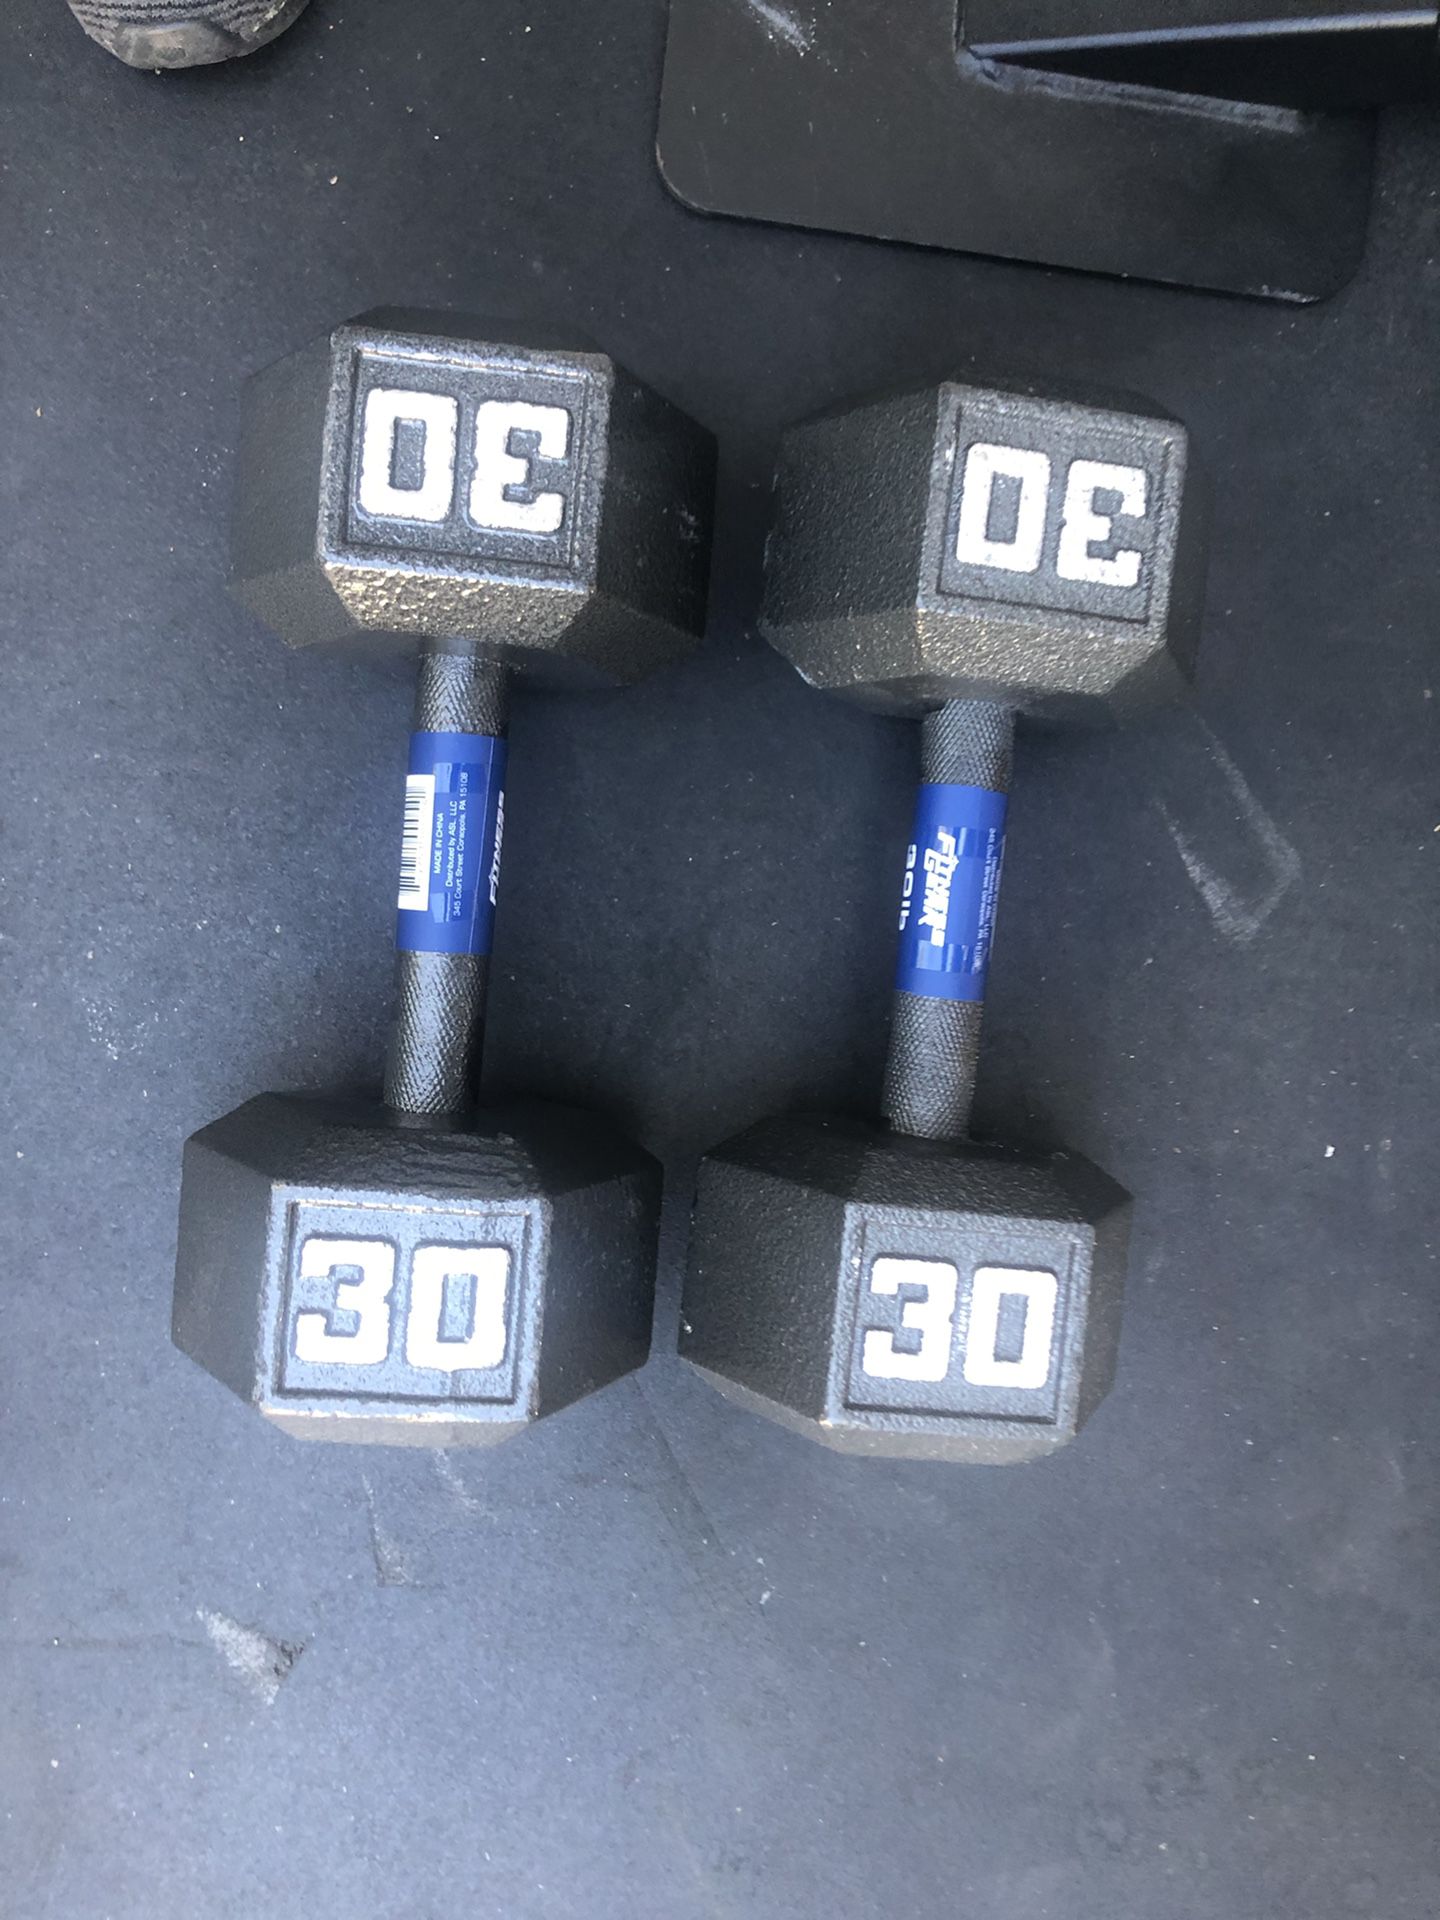 Pair of 30lbs dumbbells brand new